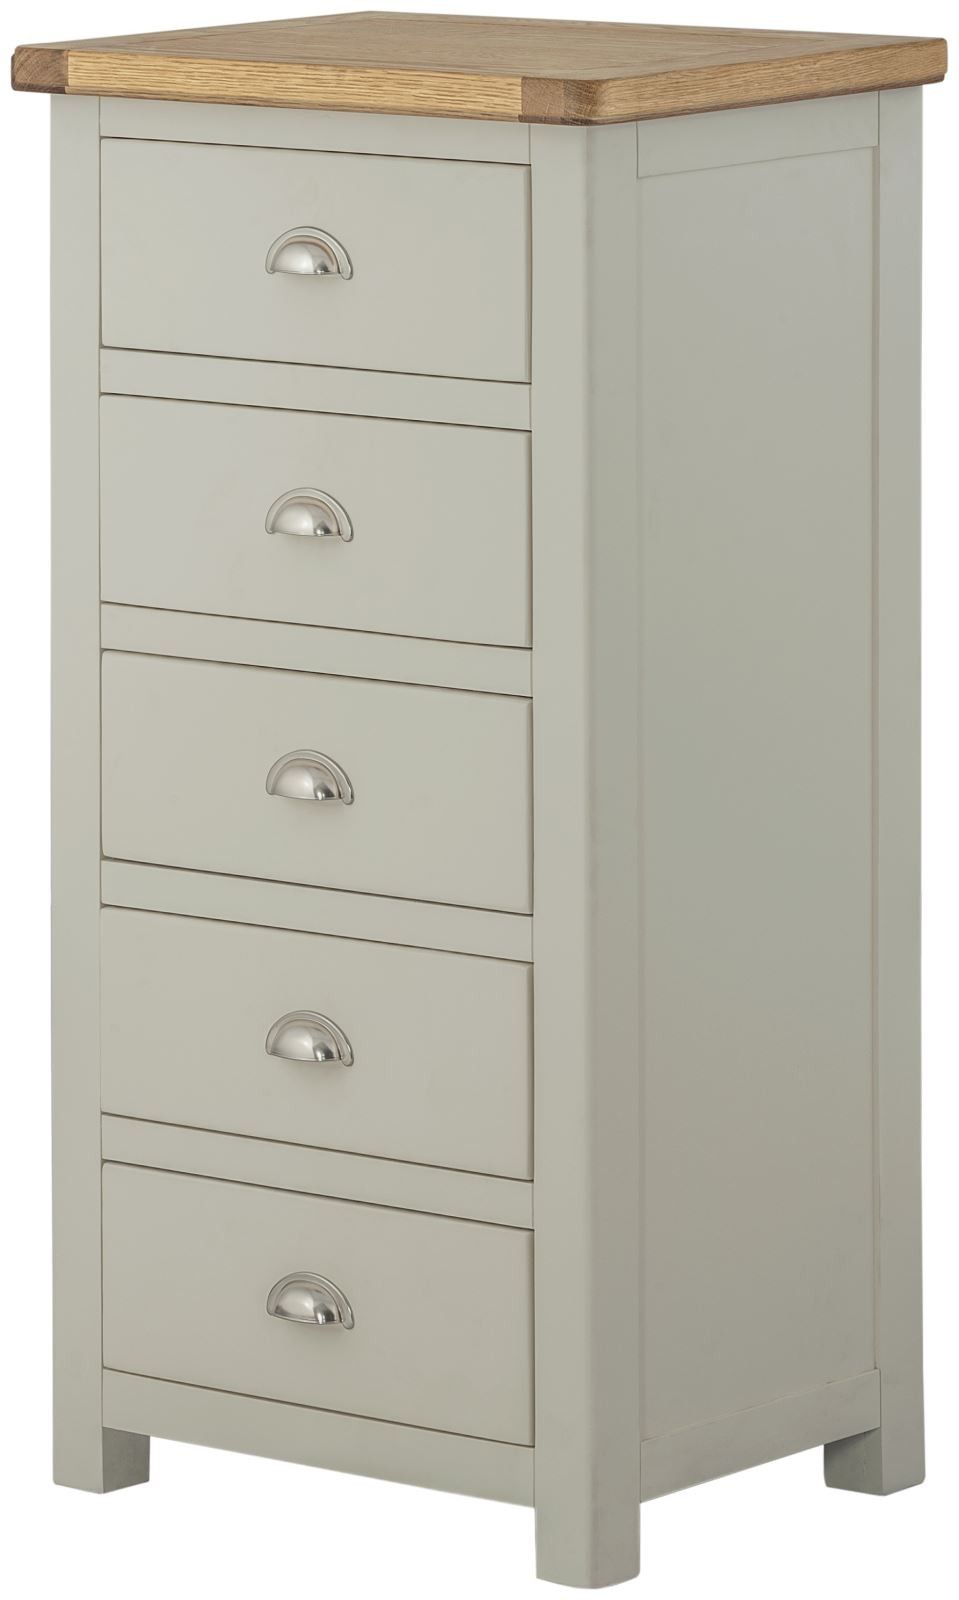 Purbeck Painted 5 Drawer Wellington Chest - Pebble